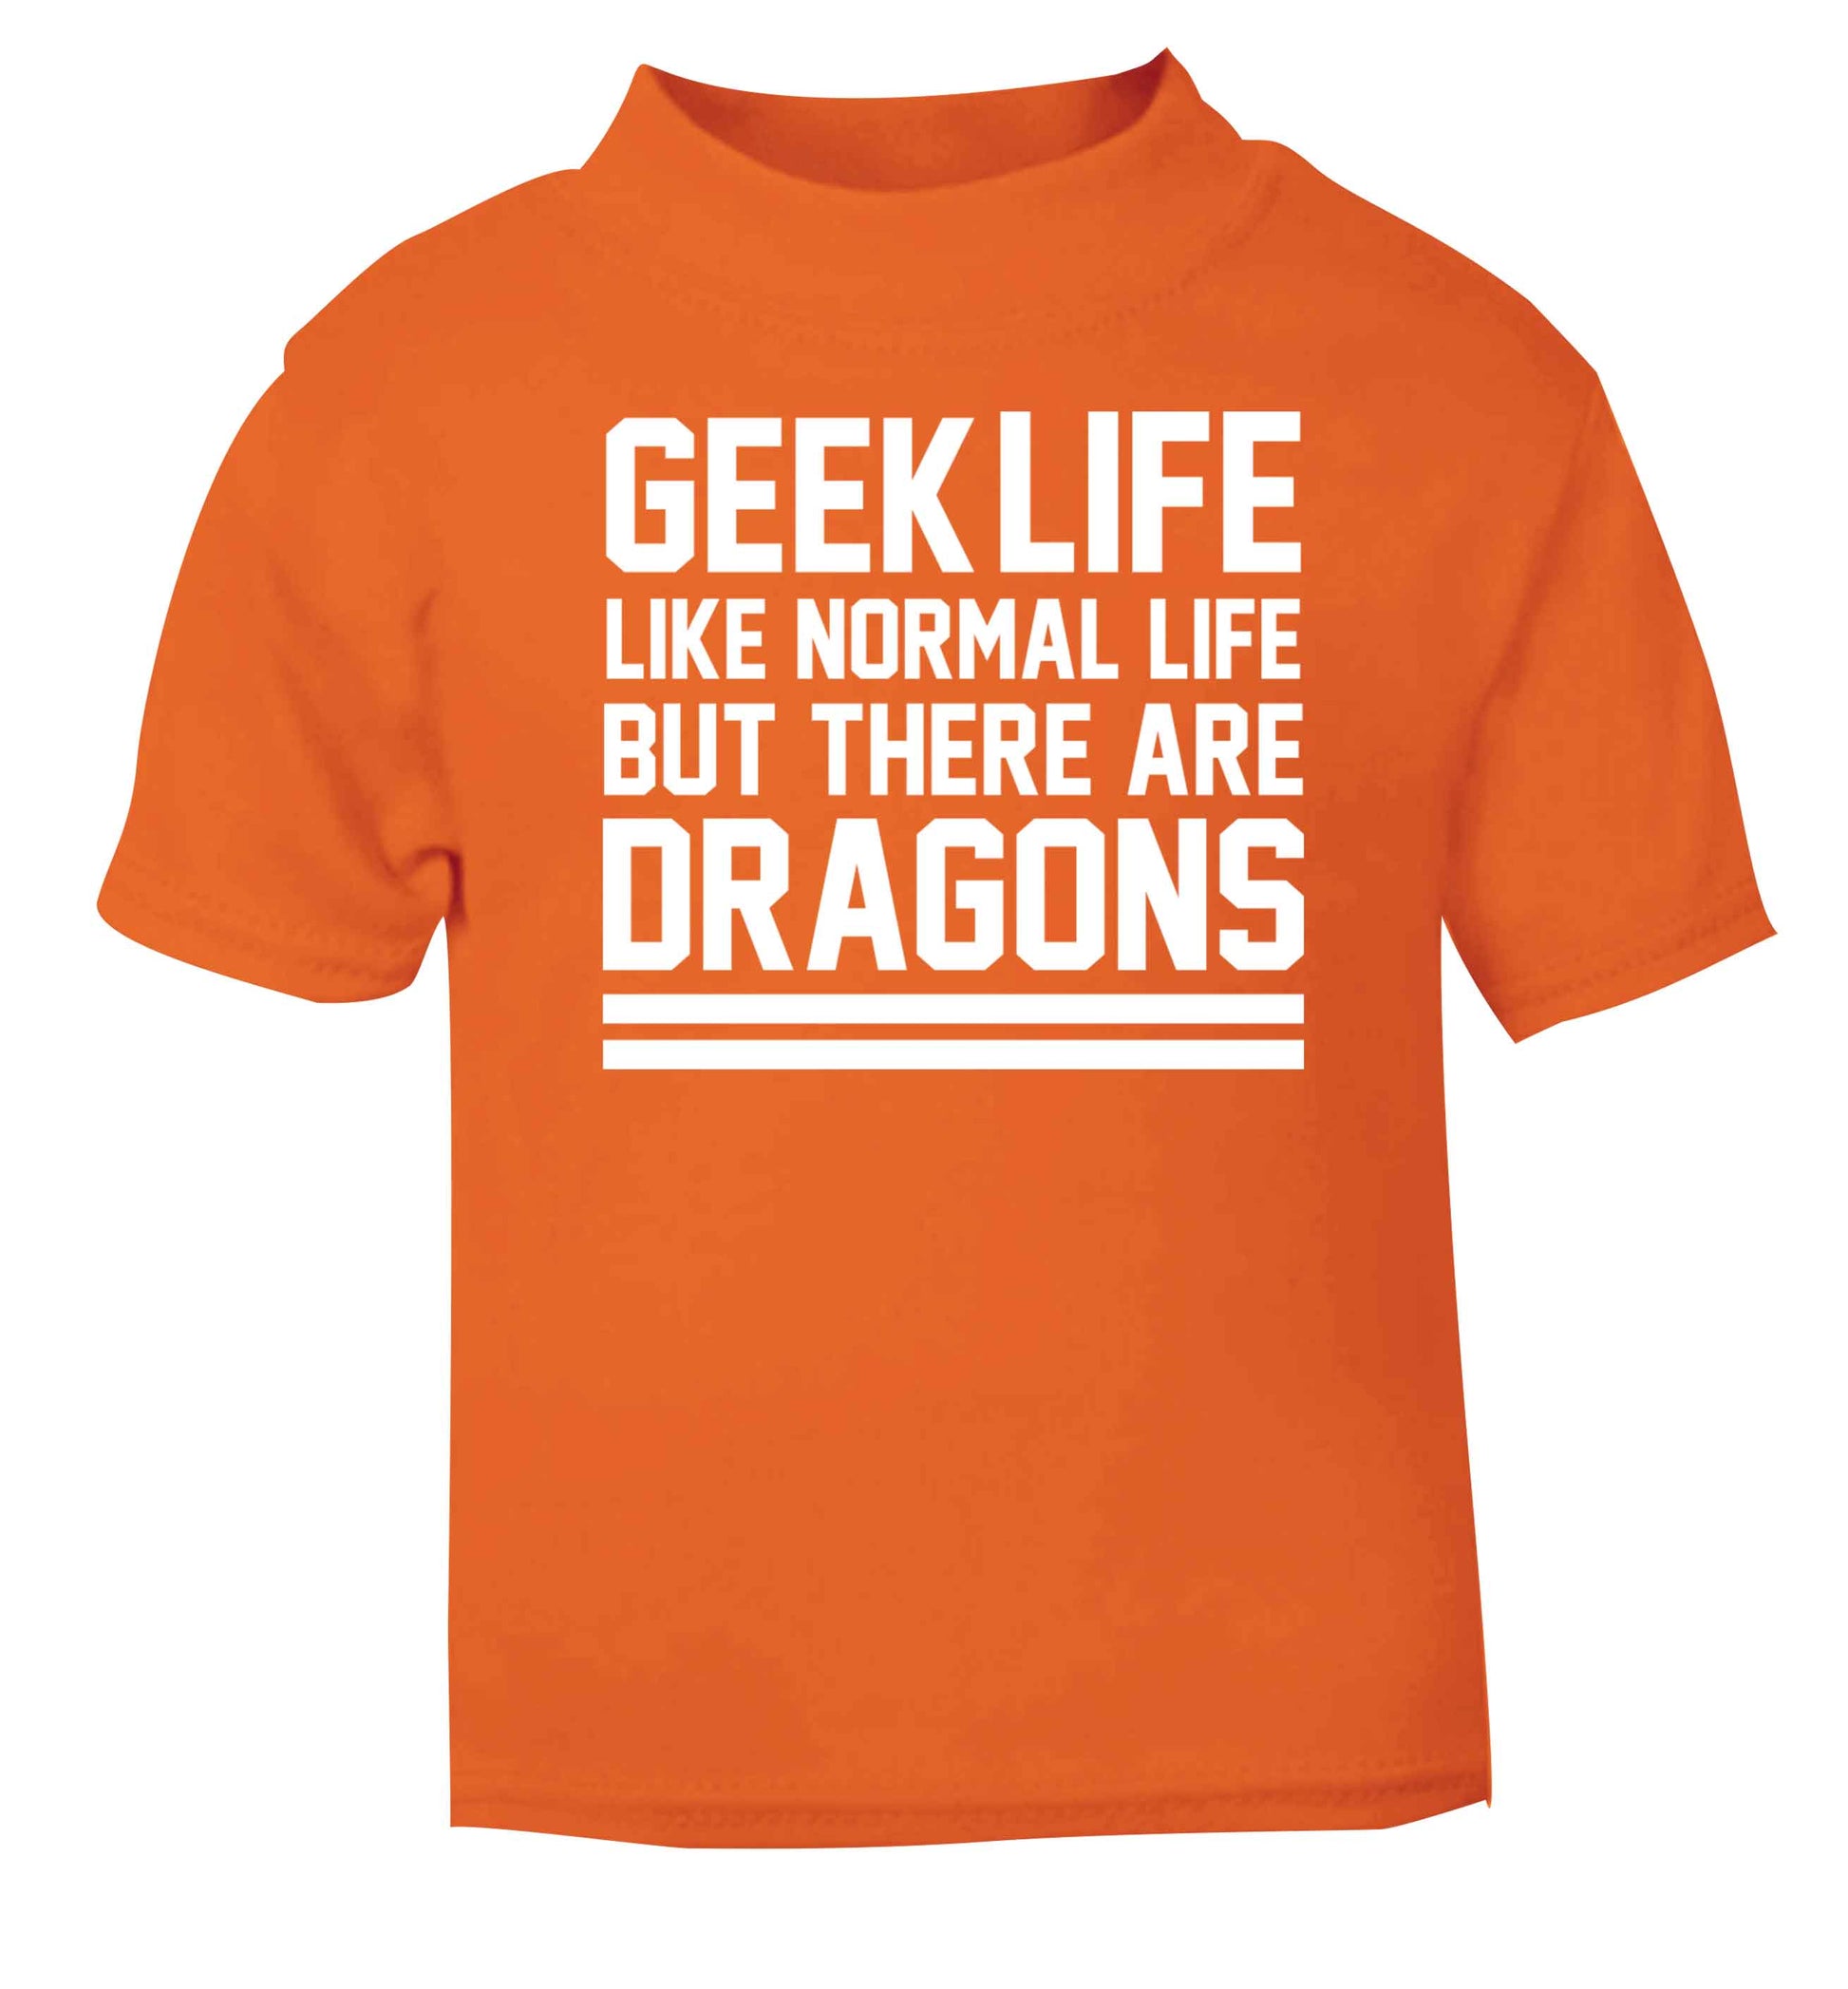 Geek life like normal life but there are dragons orange baby toddler Tshirt 2 Years